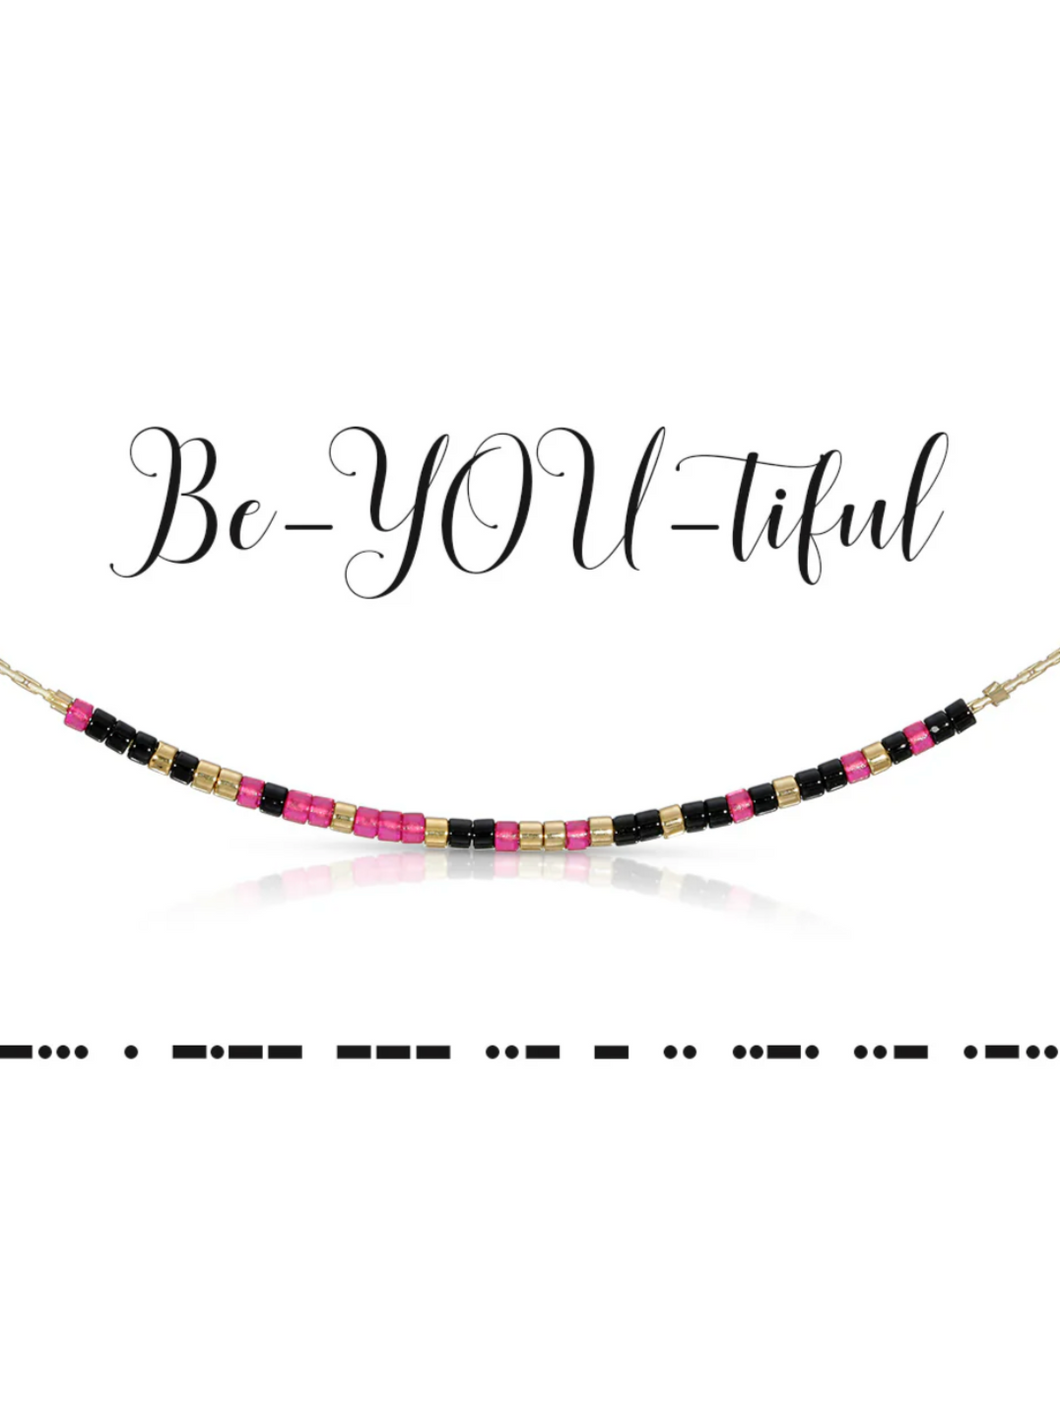 Be-YOU-tiful Necklace